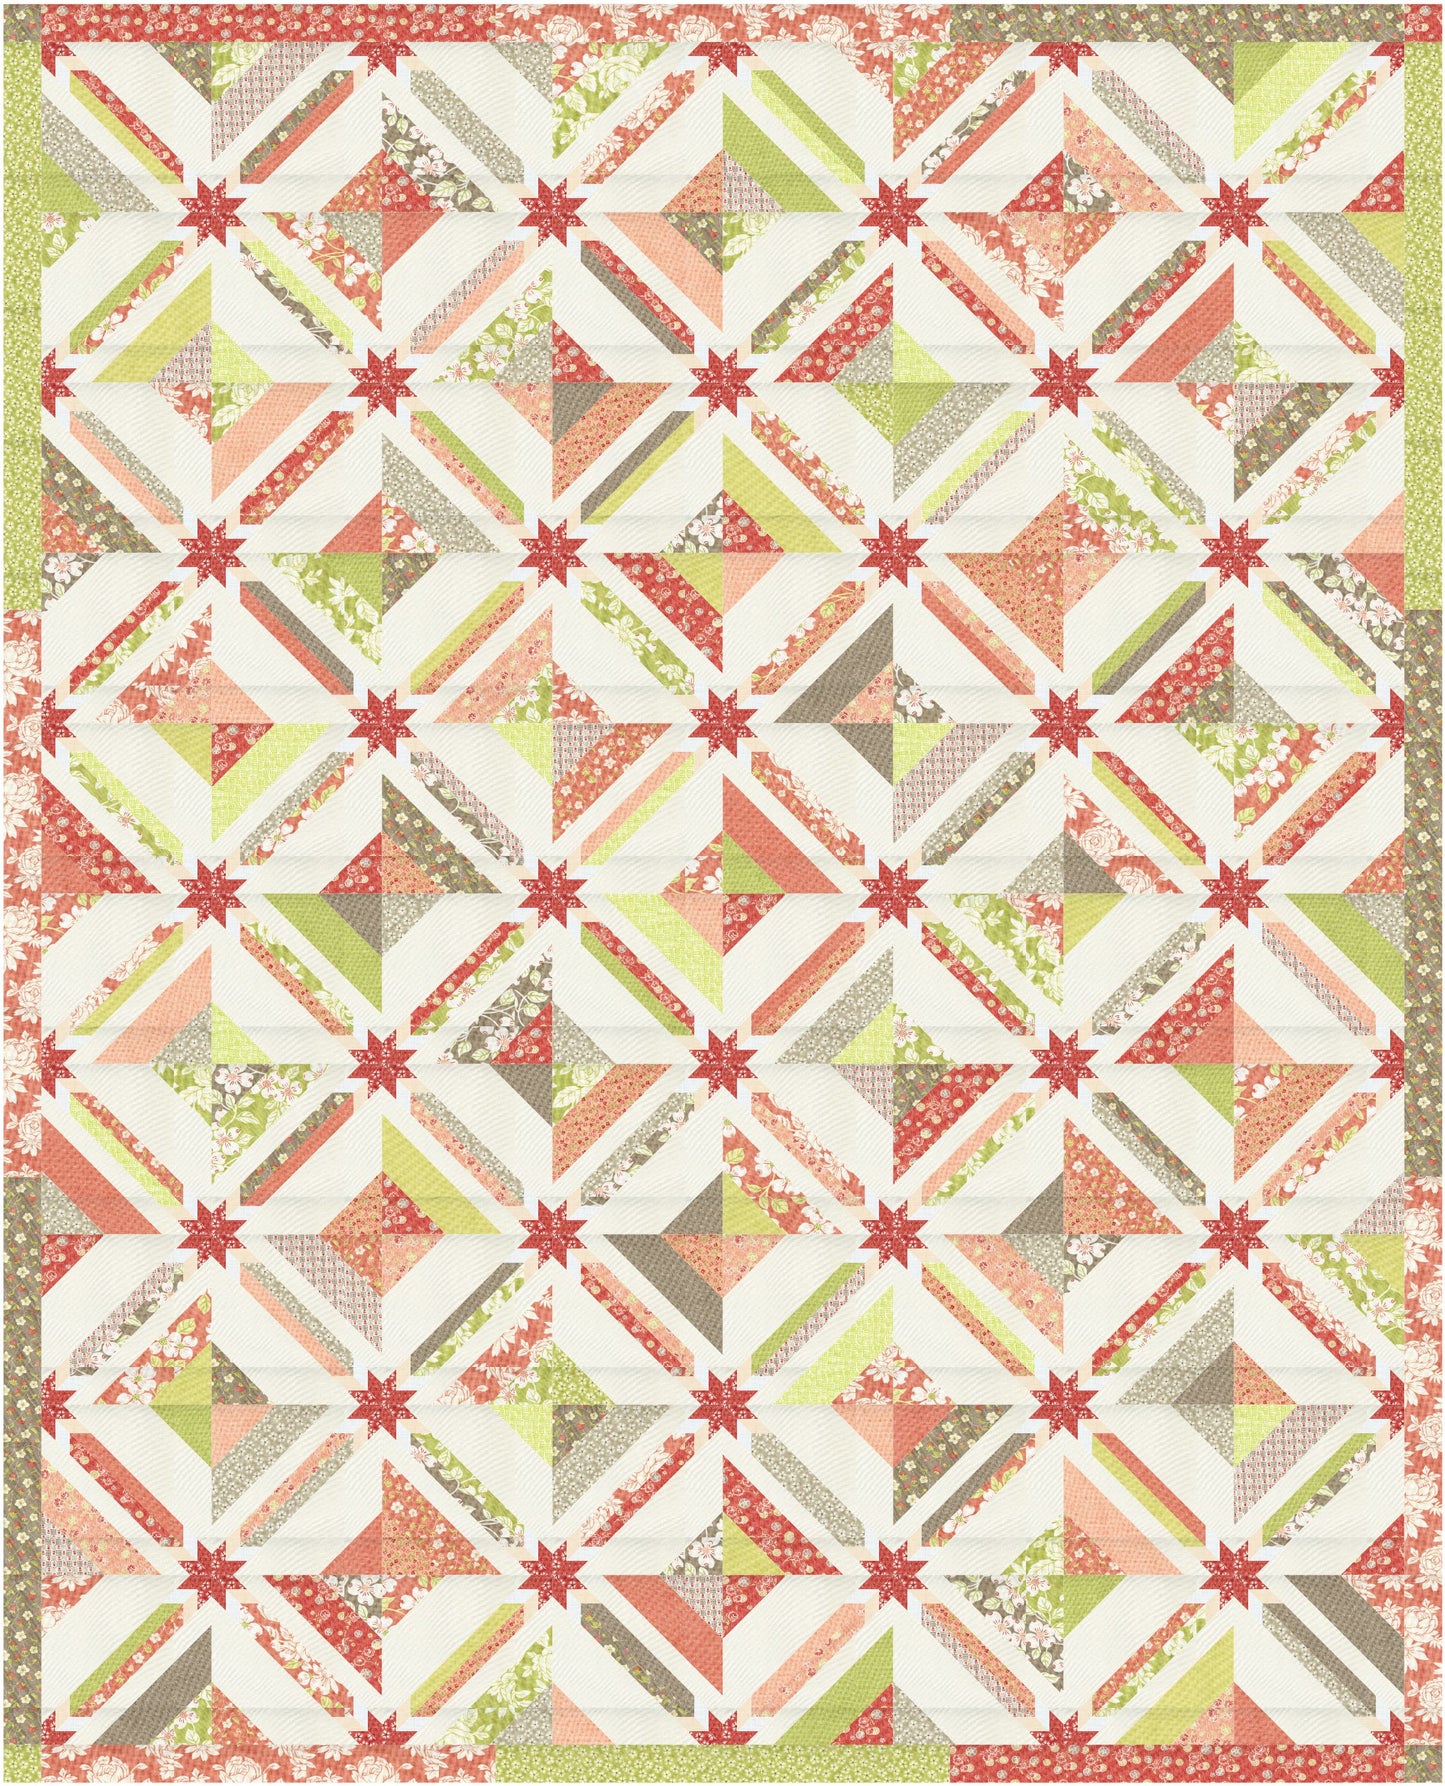 Strawberries and Rhubarb Spools and Stars Quilt Kit